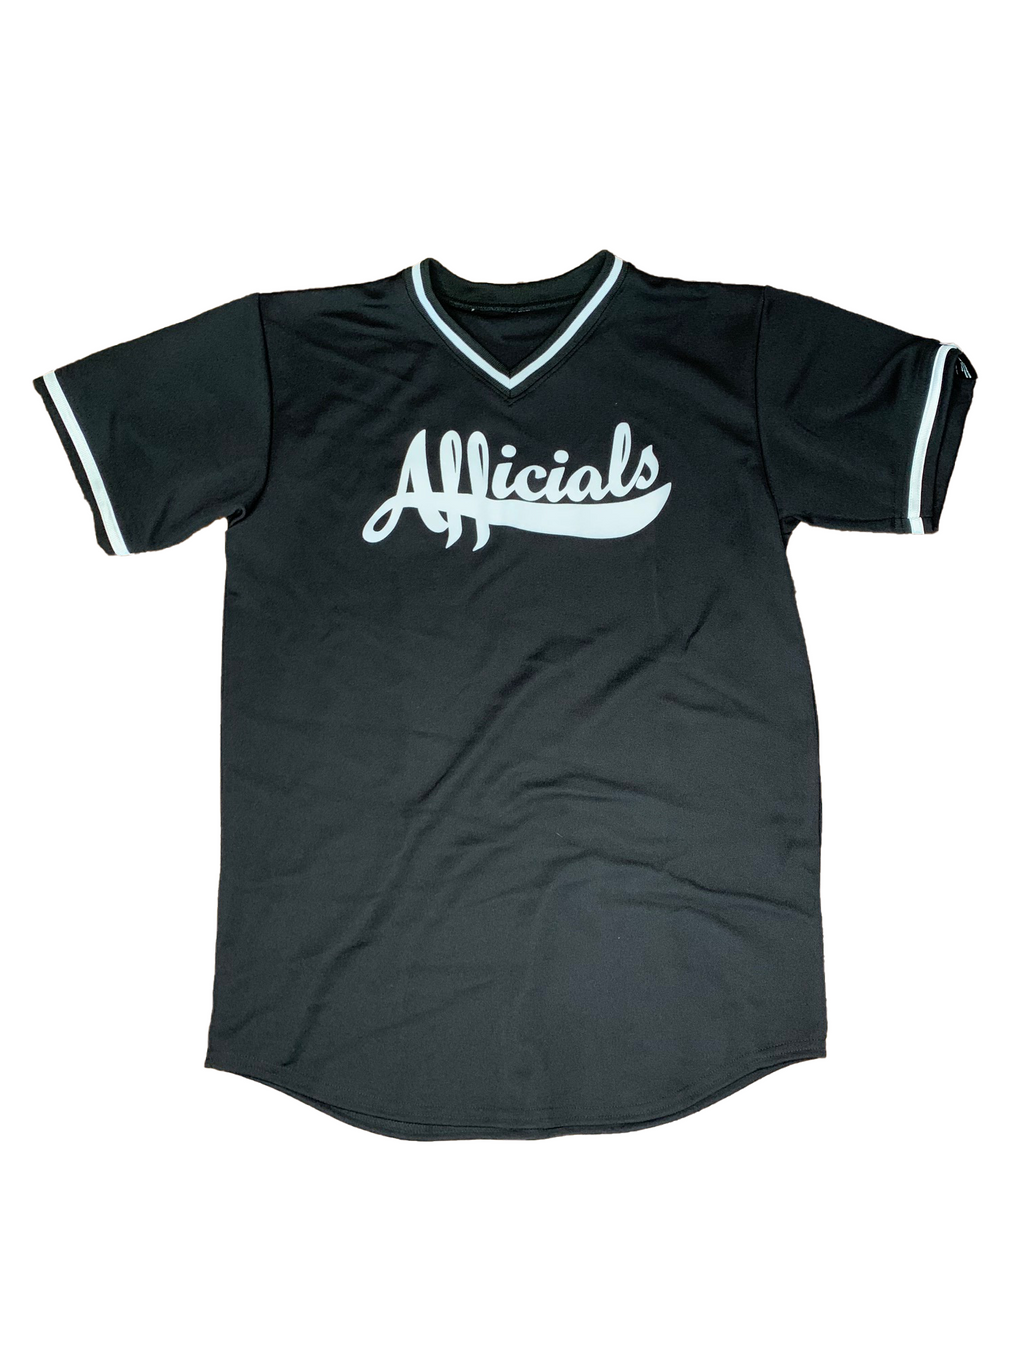 Afficials 40 Baseball Jersey BLACK/WHITE – Afficials THE LABEL ™